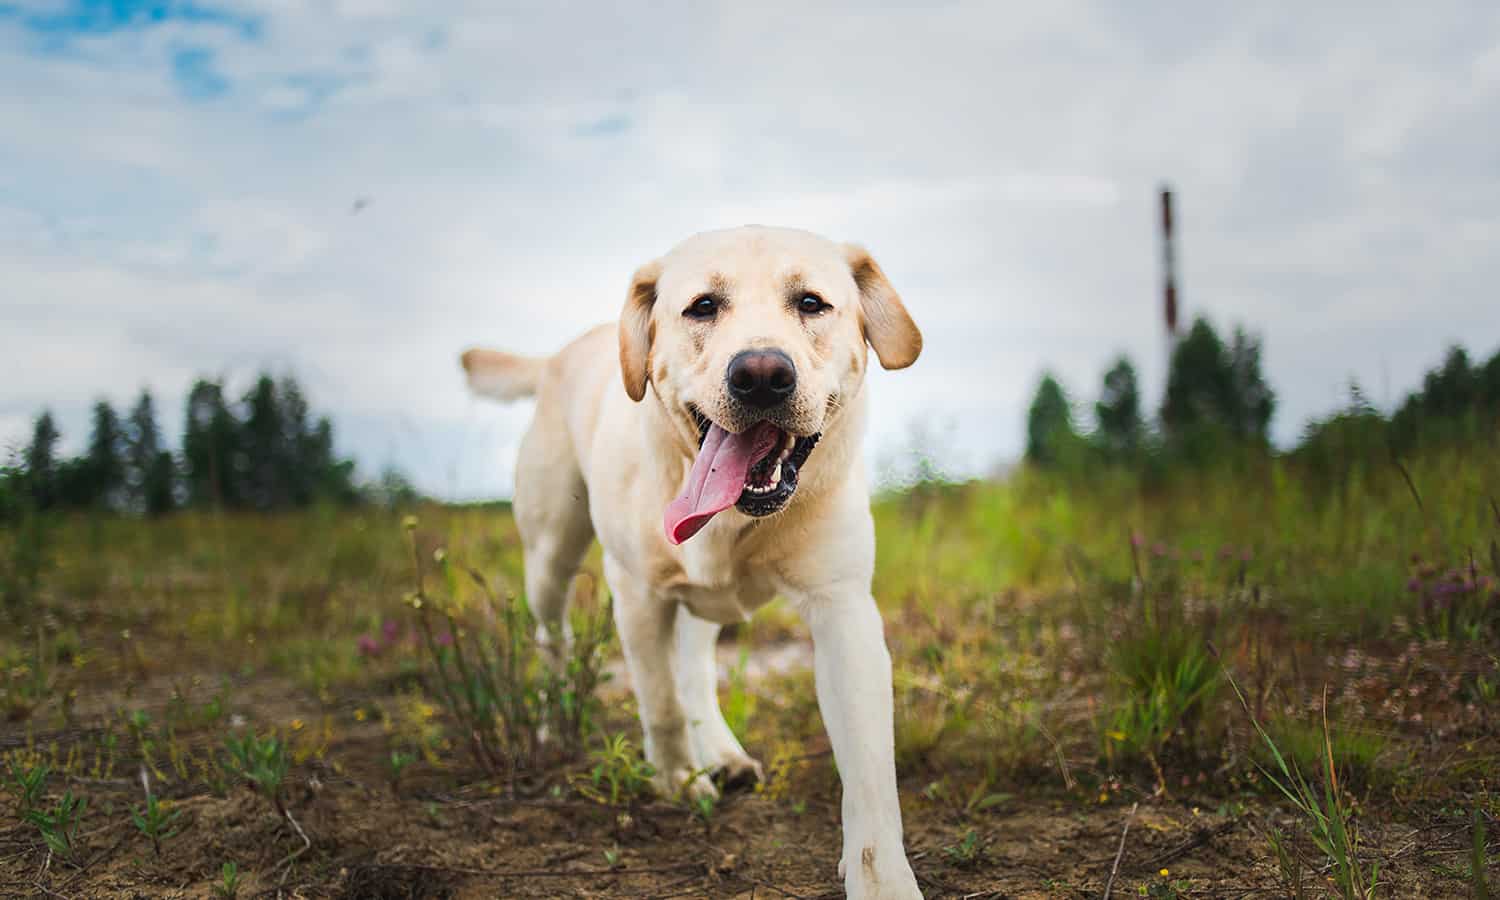 Yellow lab outside